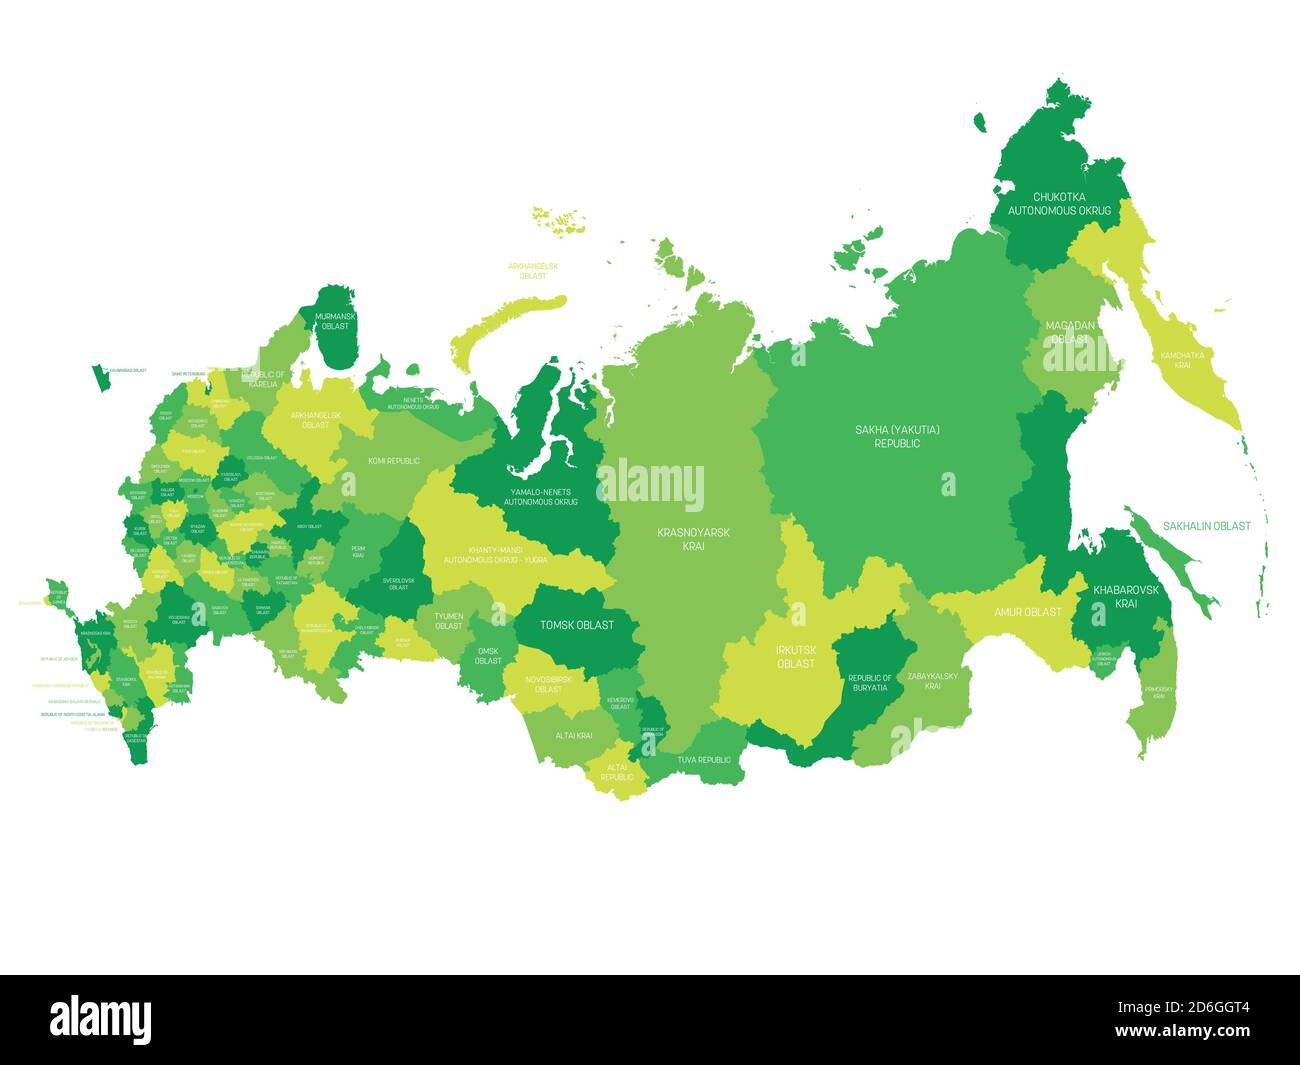 Green political map of Russia, or Russian Federation. Federal subjects - republics, krays, oblasts, cities of federal significance, autonomous oblasts and autonomous okrugs. Simple flat vector map with labels. Stock Vector